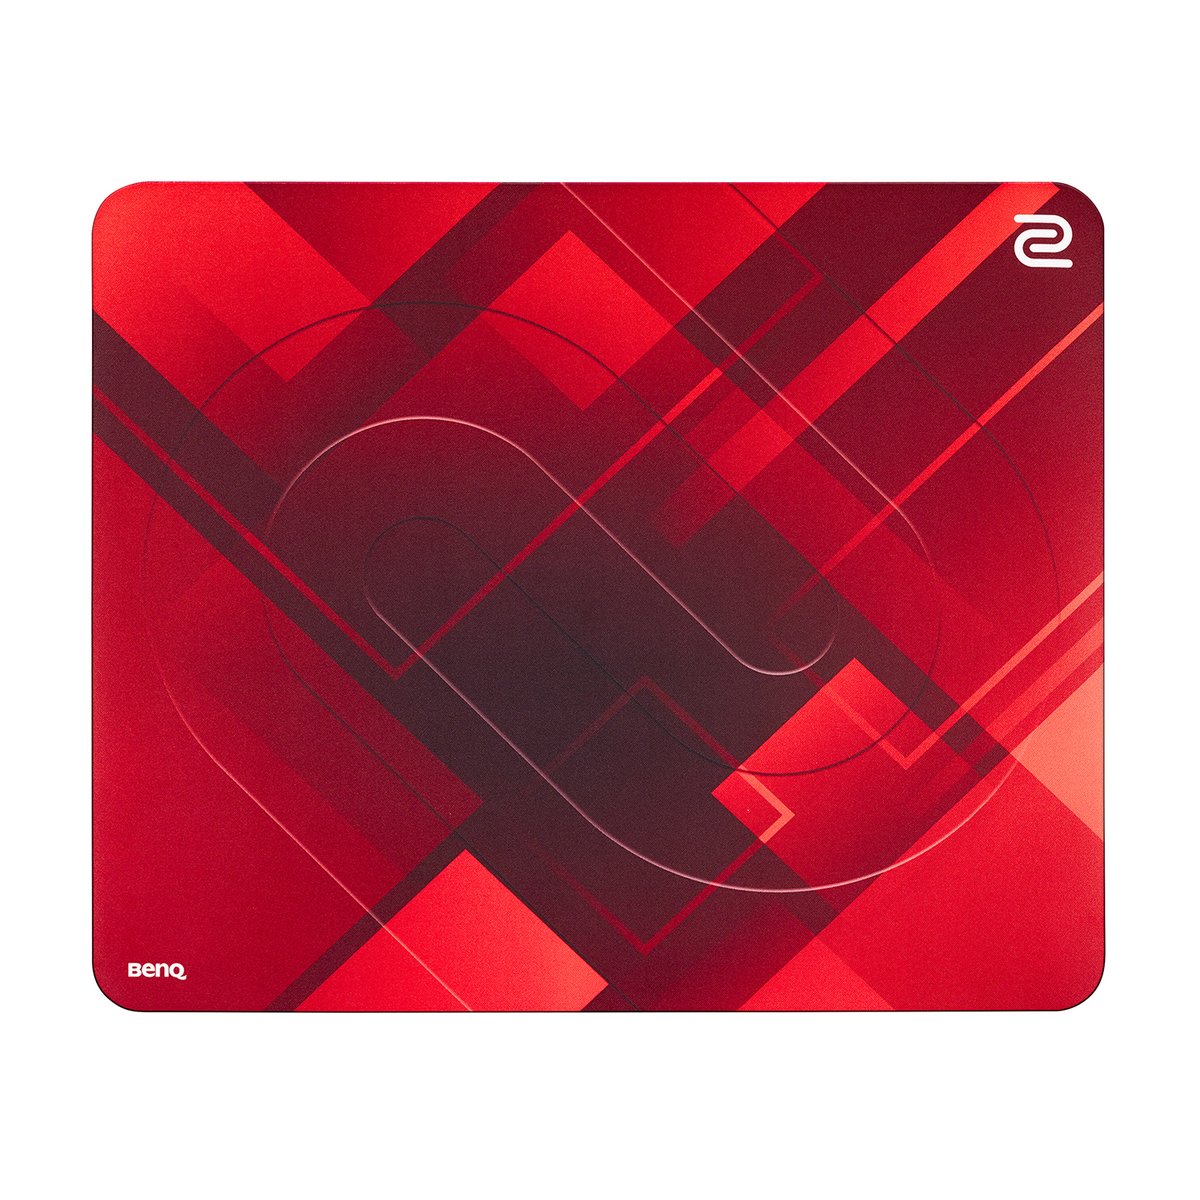 Zowie To Release The G Sr Se In Red Myztro Gaming